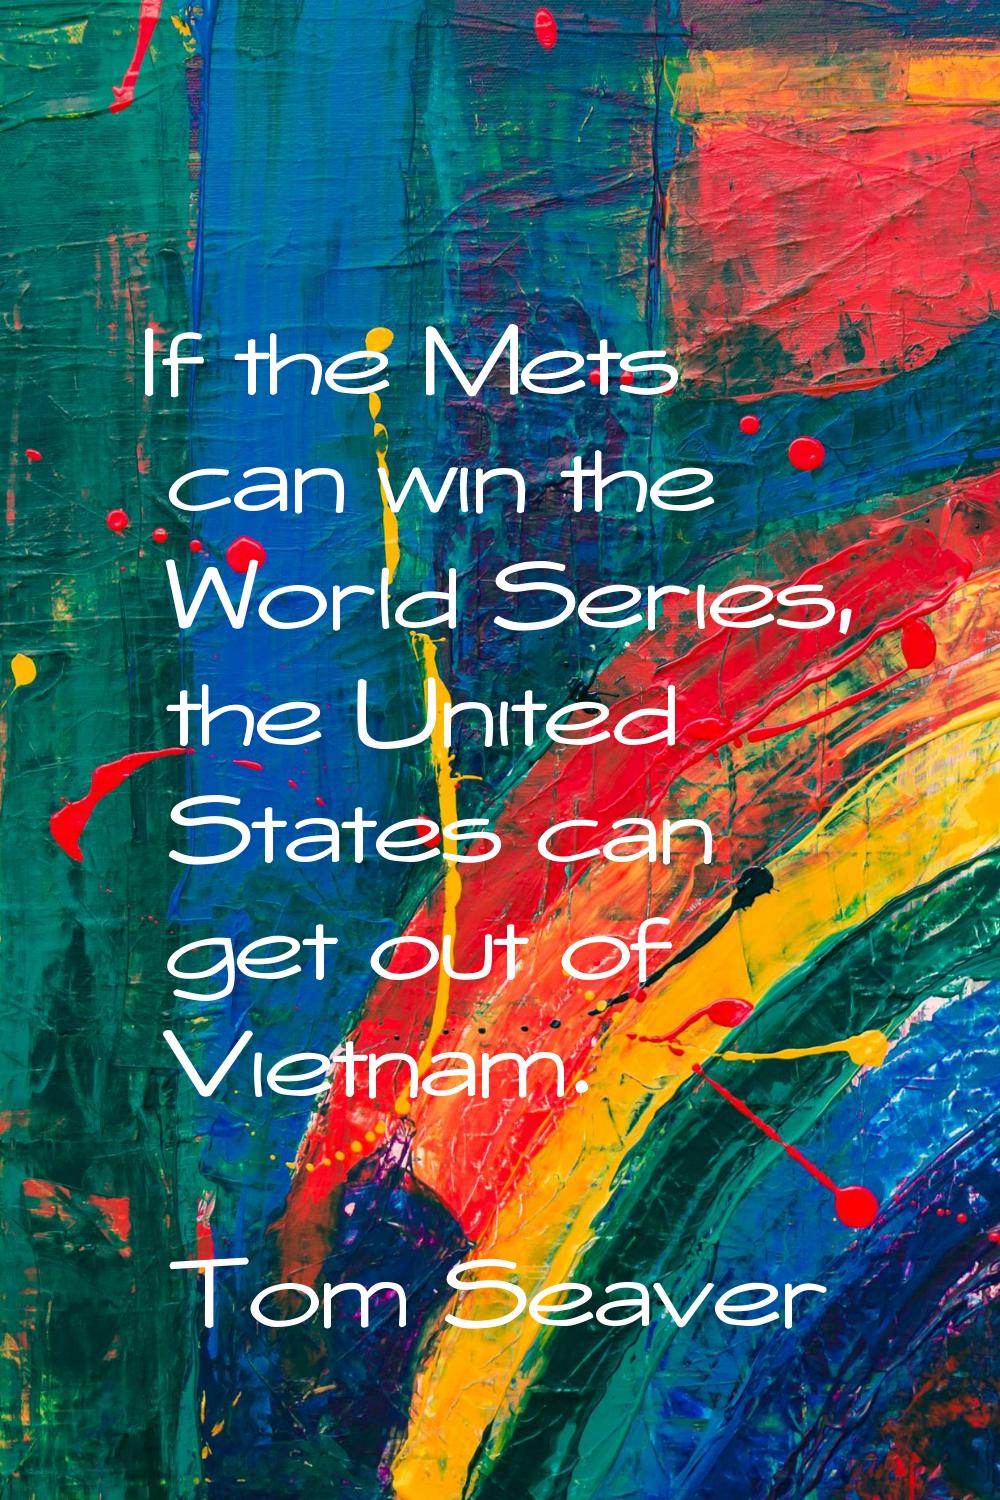 If the Mets can win the World Series, the United States can get out of Vietnam.